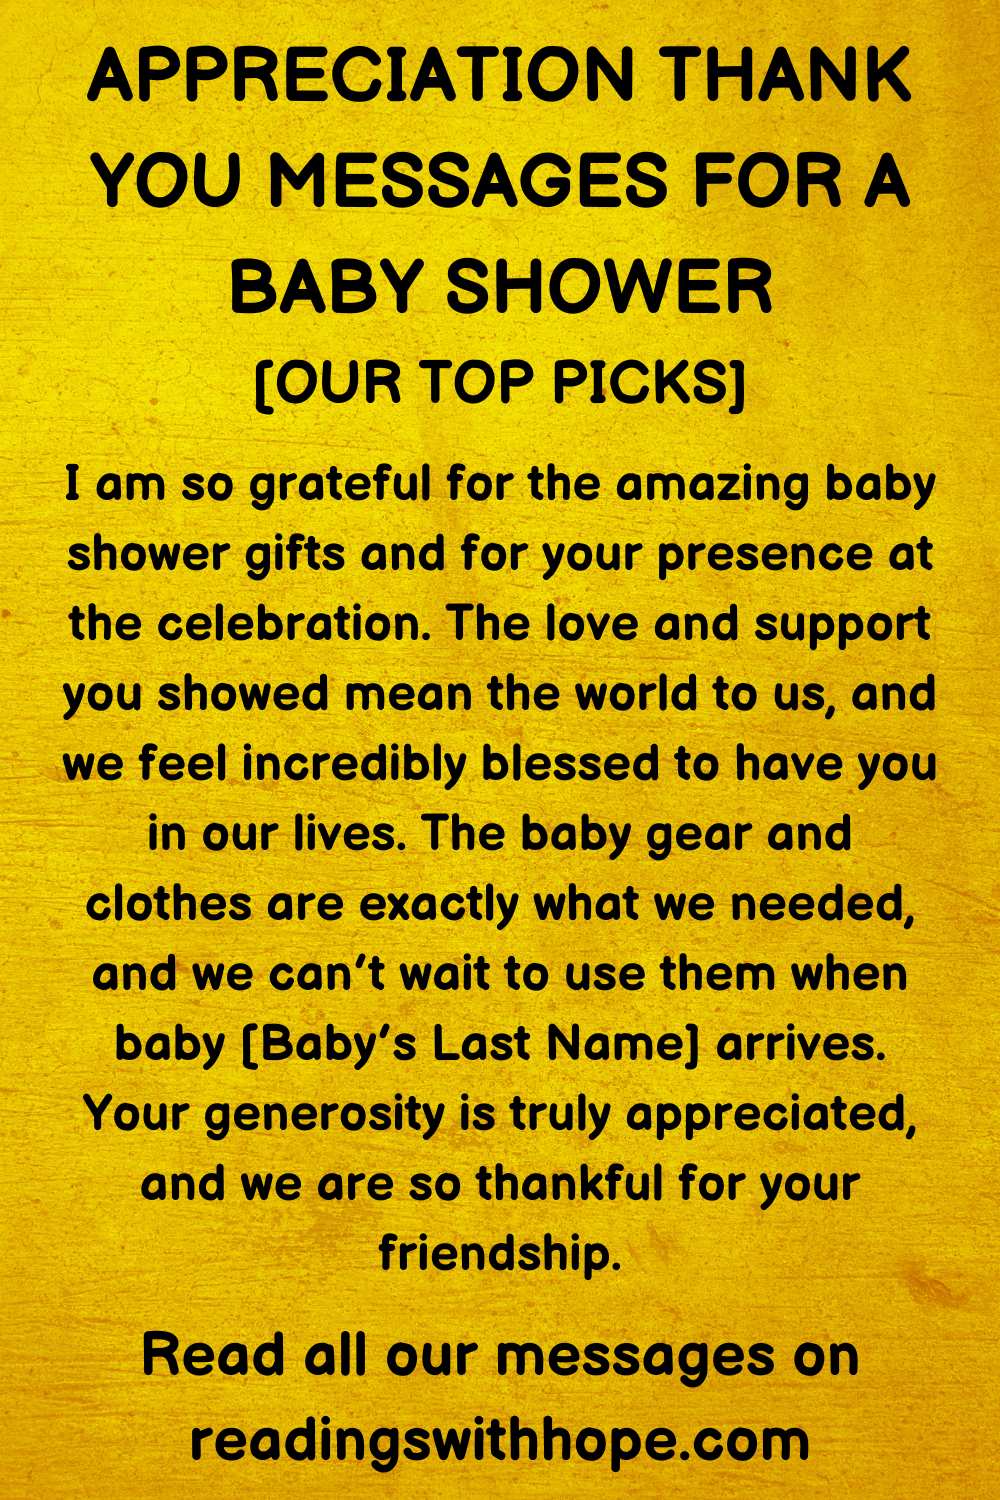 Appreciation Thank You Message for a Baby Shower